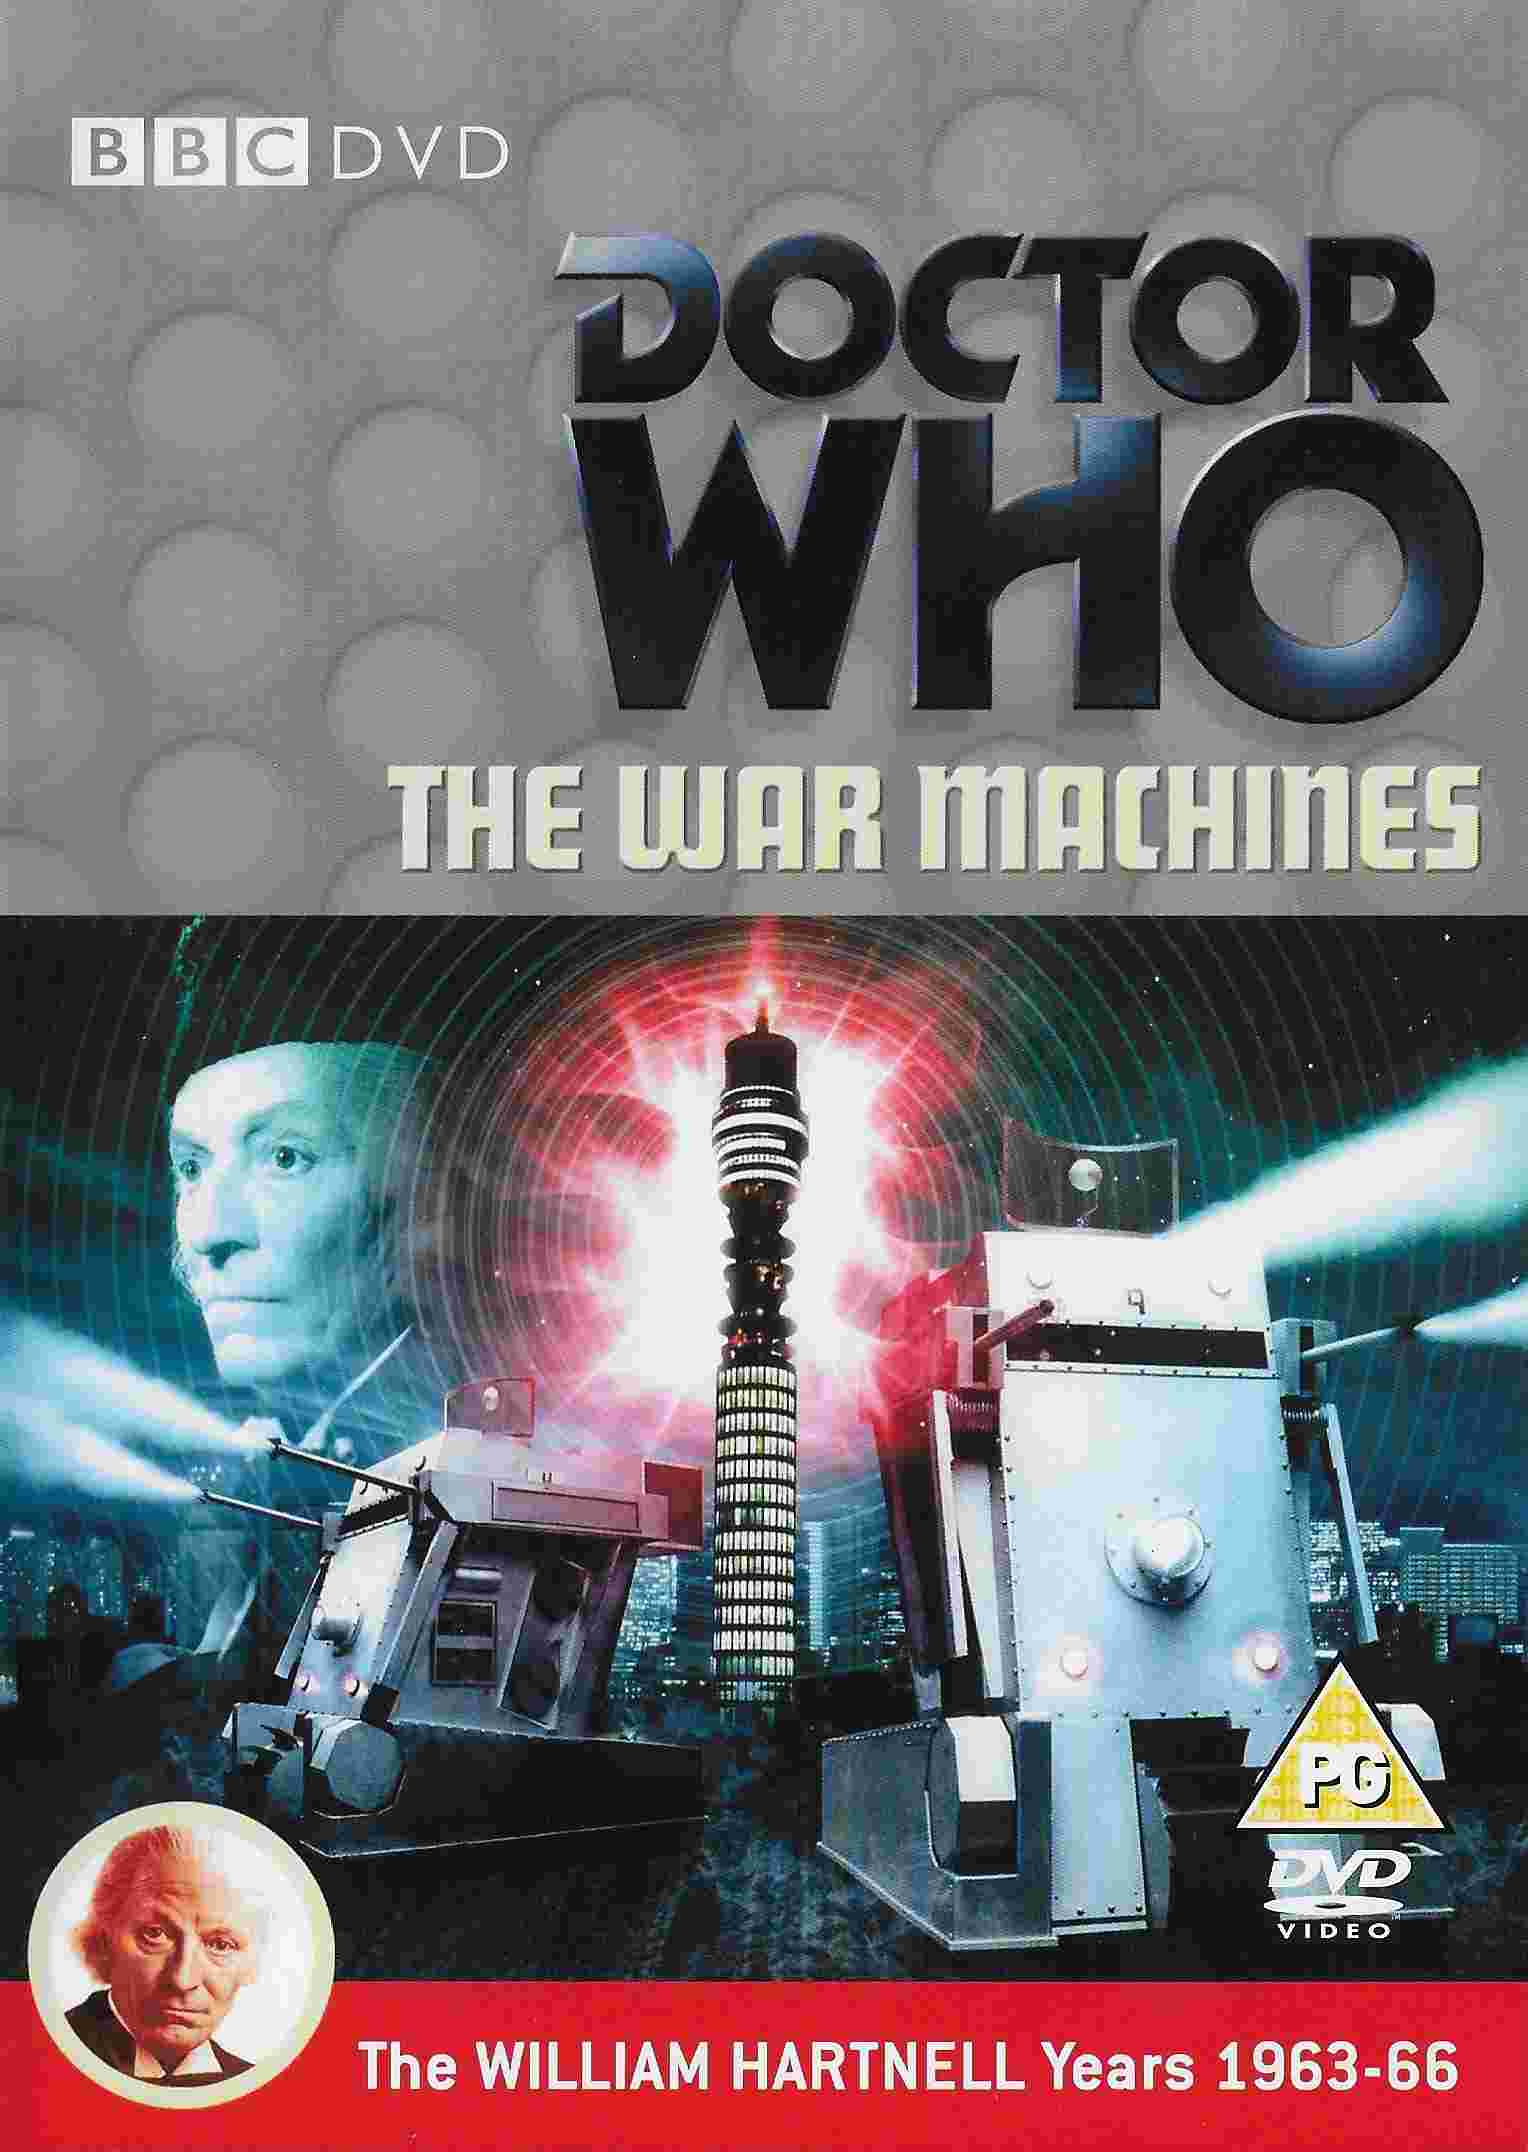 Picture of BBCDVD 2441 Doctor Who - The war machines by artist Ian Stuart Black from the BBC records and Tapes library